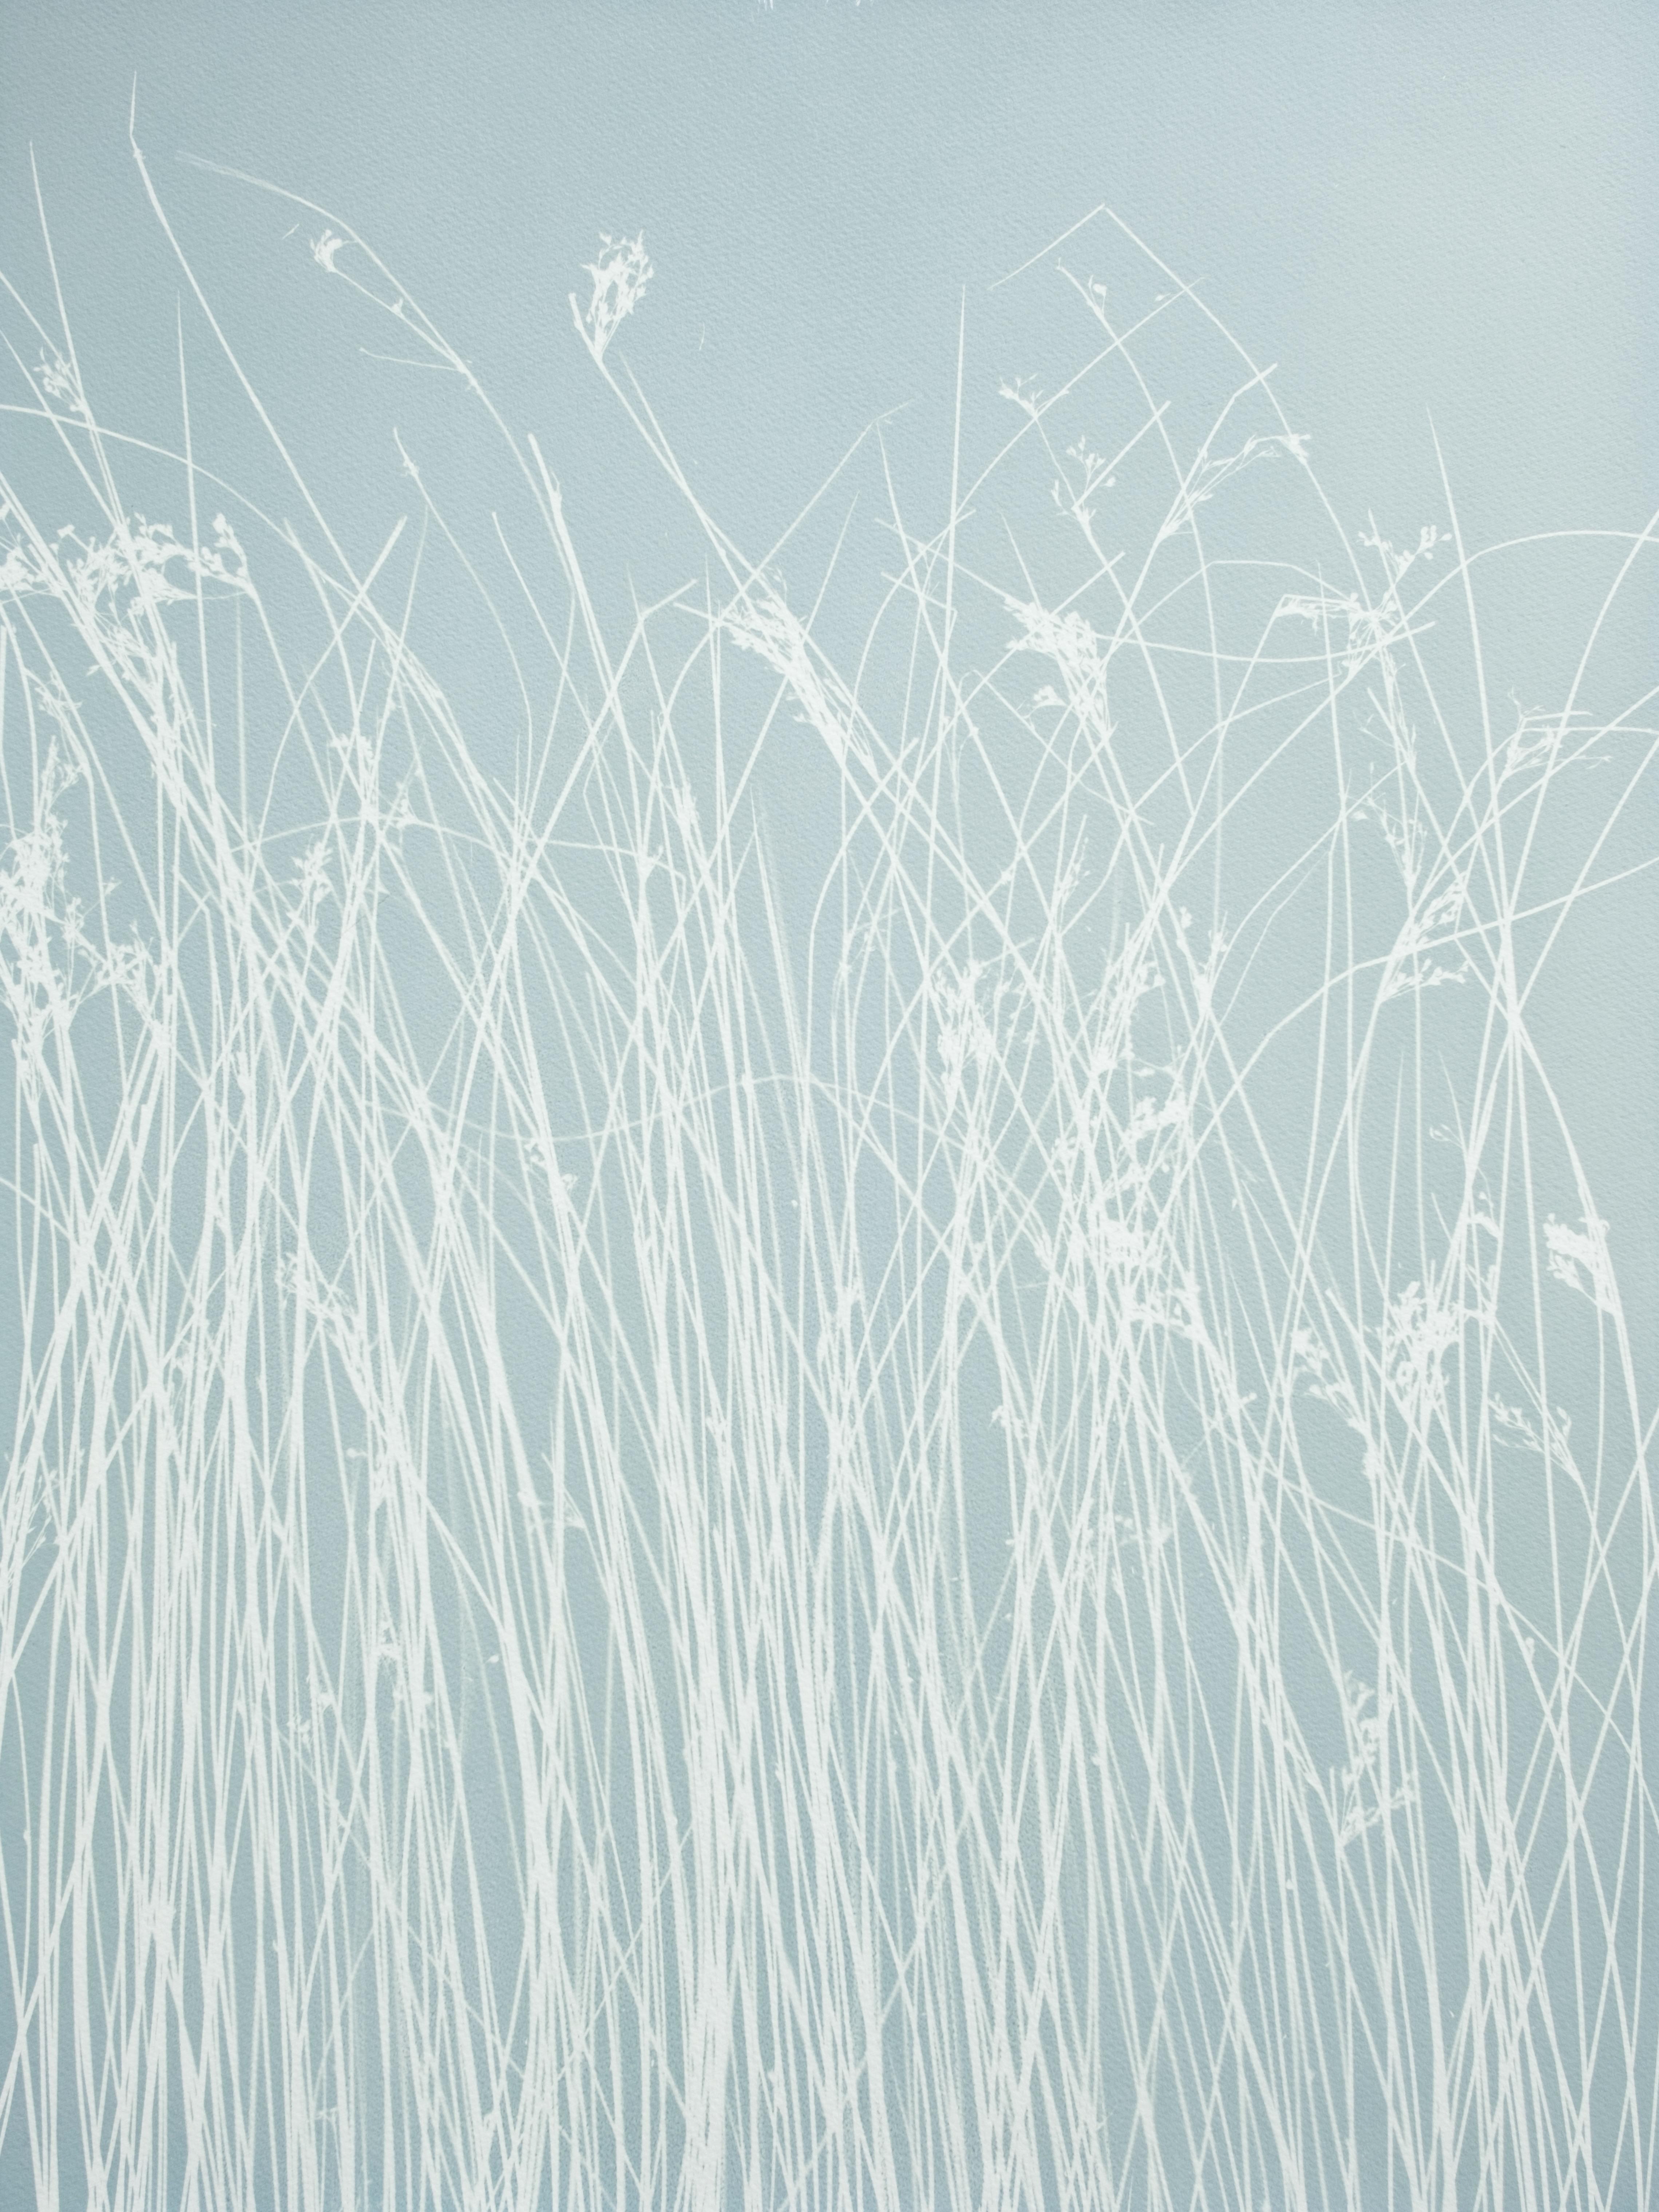 Christine So Still-Life Photograph - Cloudy Day Marsh Grass II (hand-printed botanical cyanotype, 24 x 18 inches)